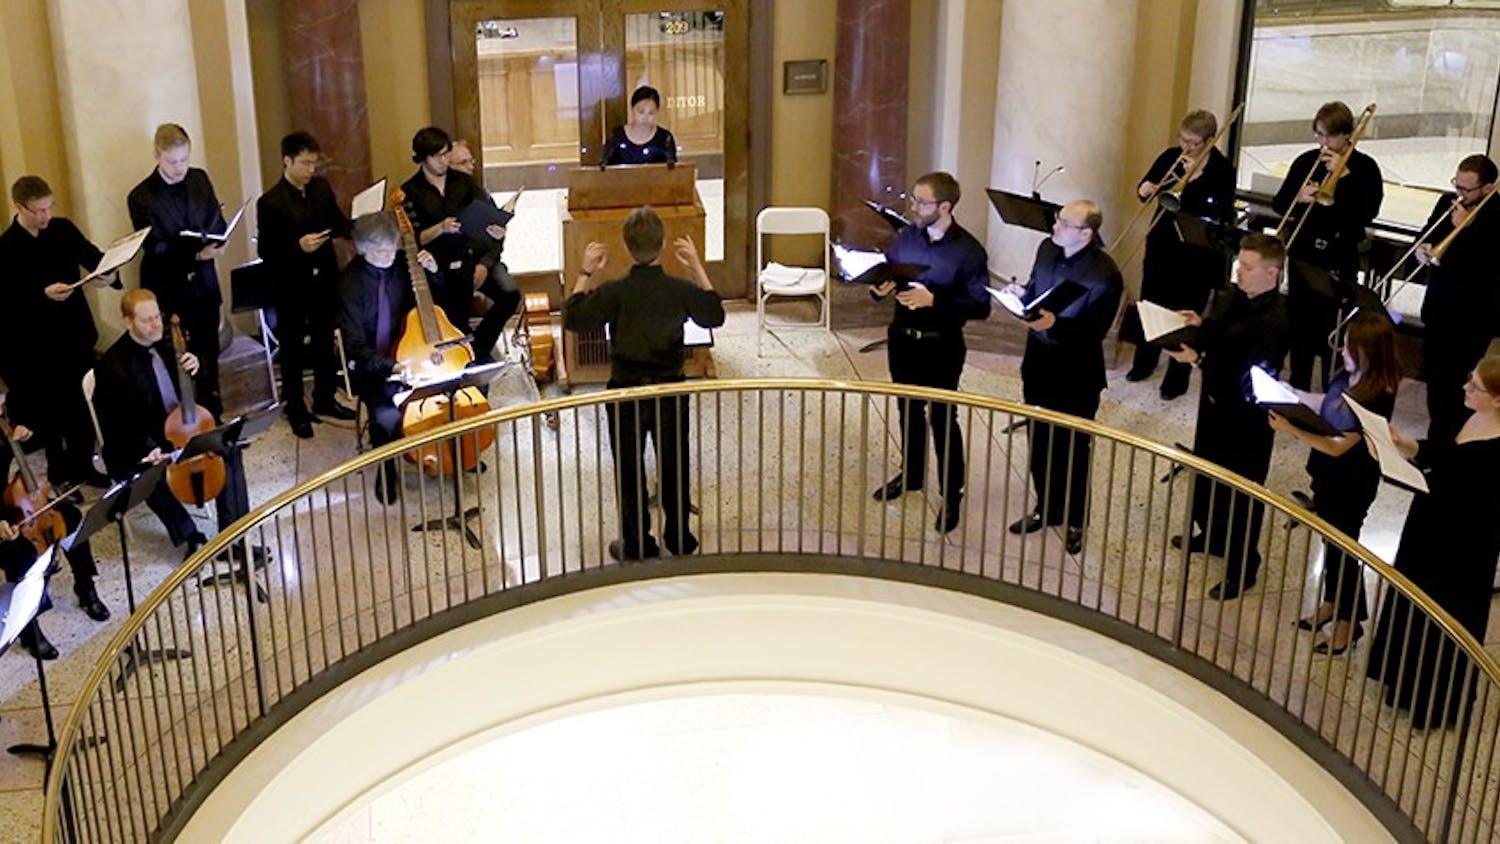 Members of Historical Performance Institute from Jaocbs School of Music and Alchymy Viols perform Alchymy Friday at the courthouse. Bloomington Early Music, Alchymy Viols, and Historical Performance Institute opened a free public concert of 17th century music works. 